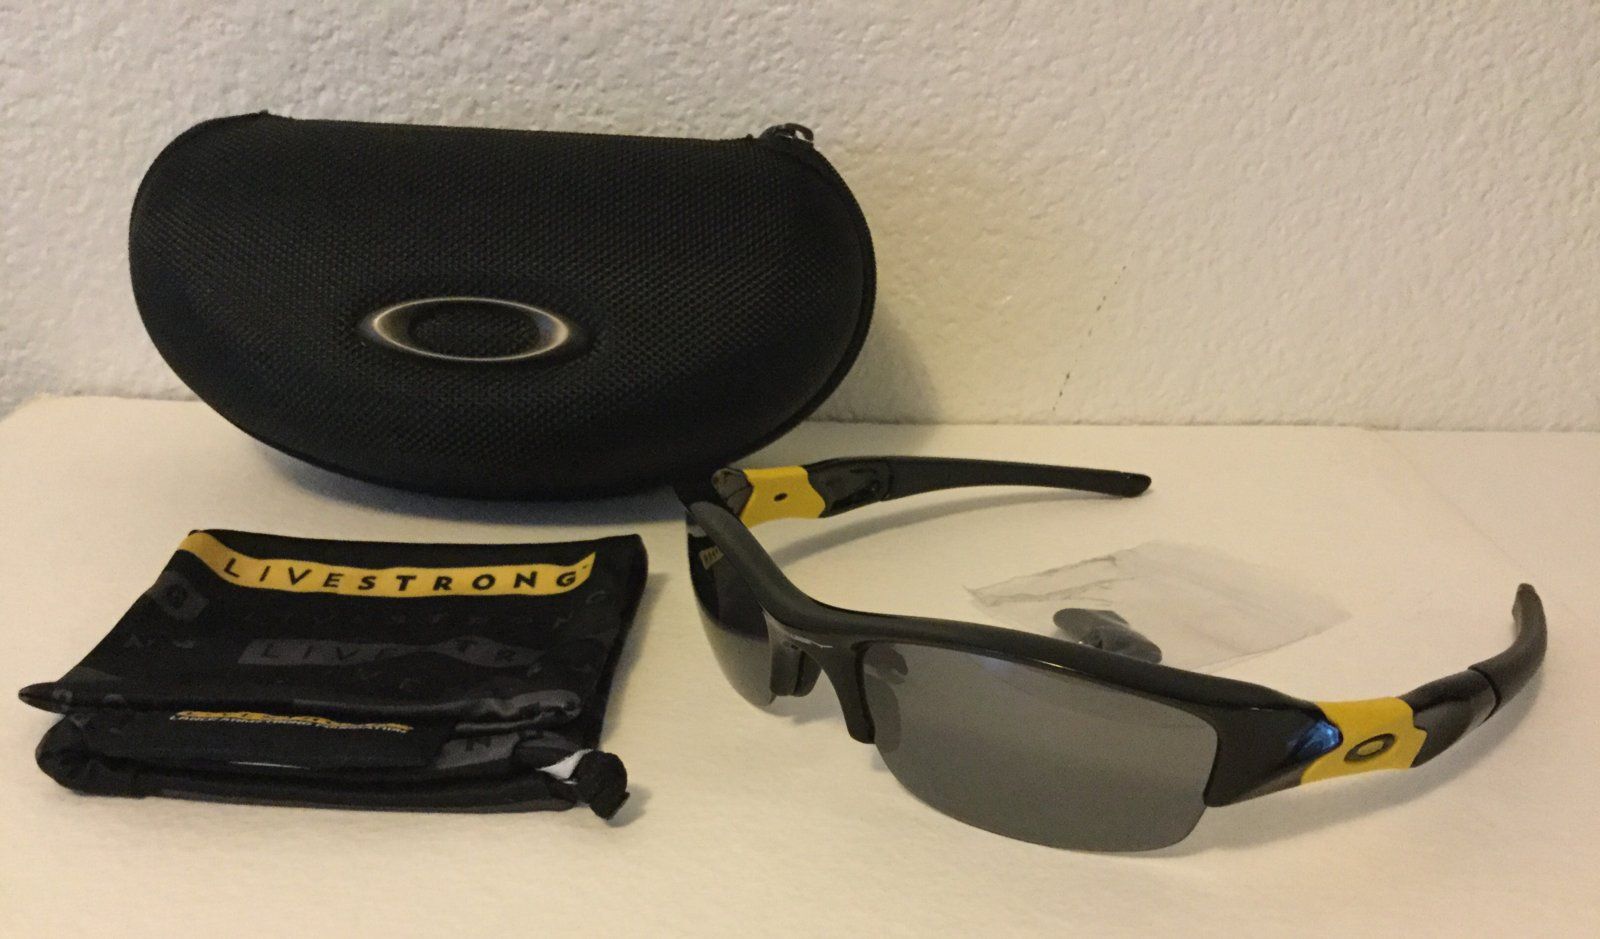 Sold - Oakley Livestrong Special Edition Bundle (New)